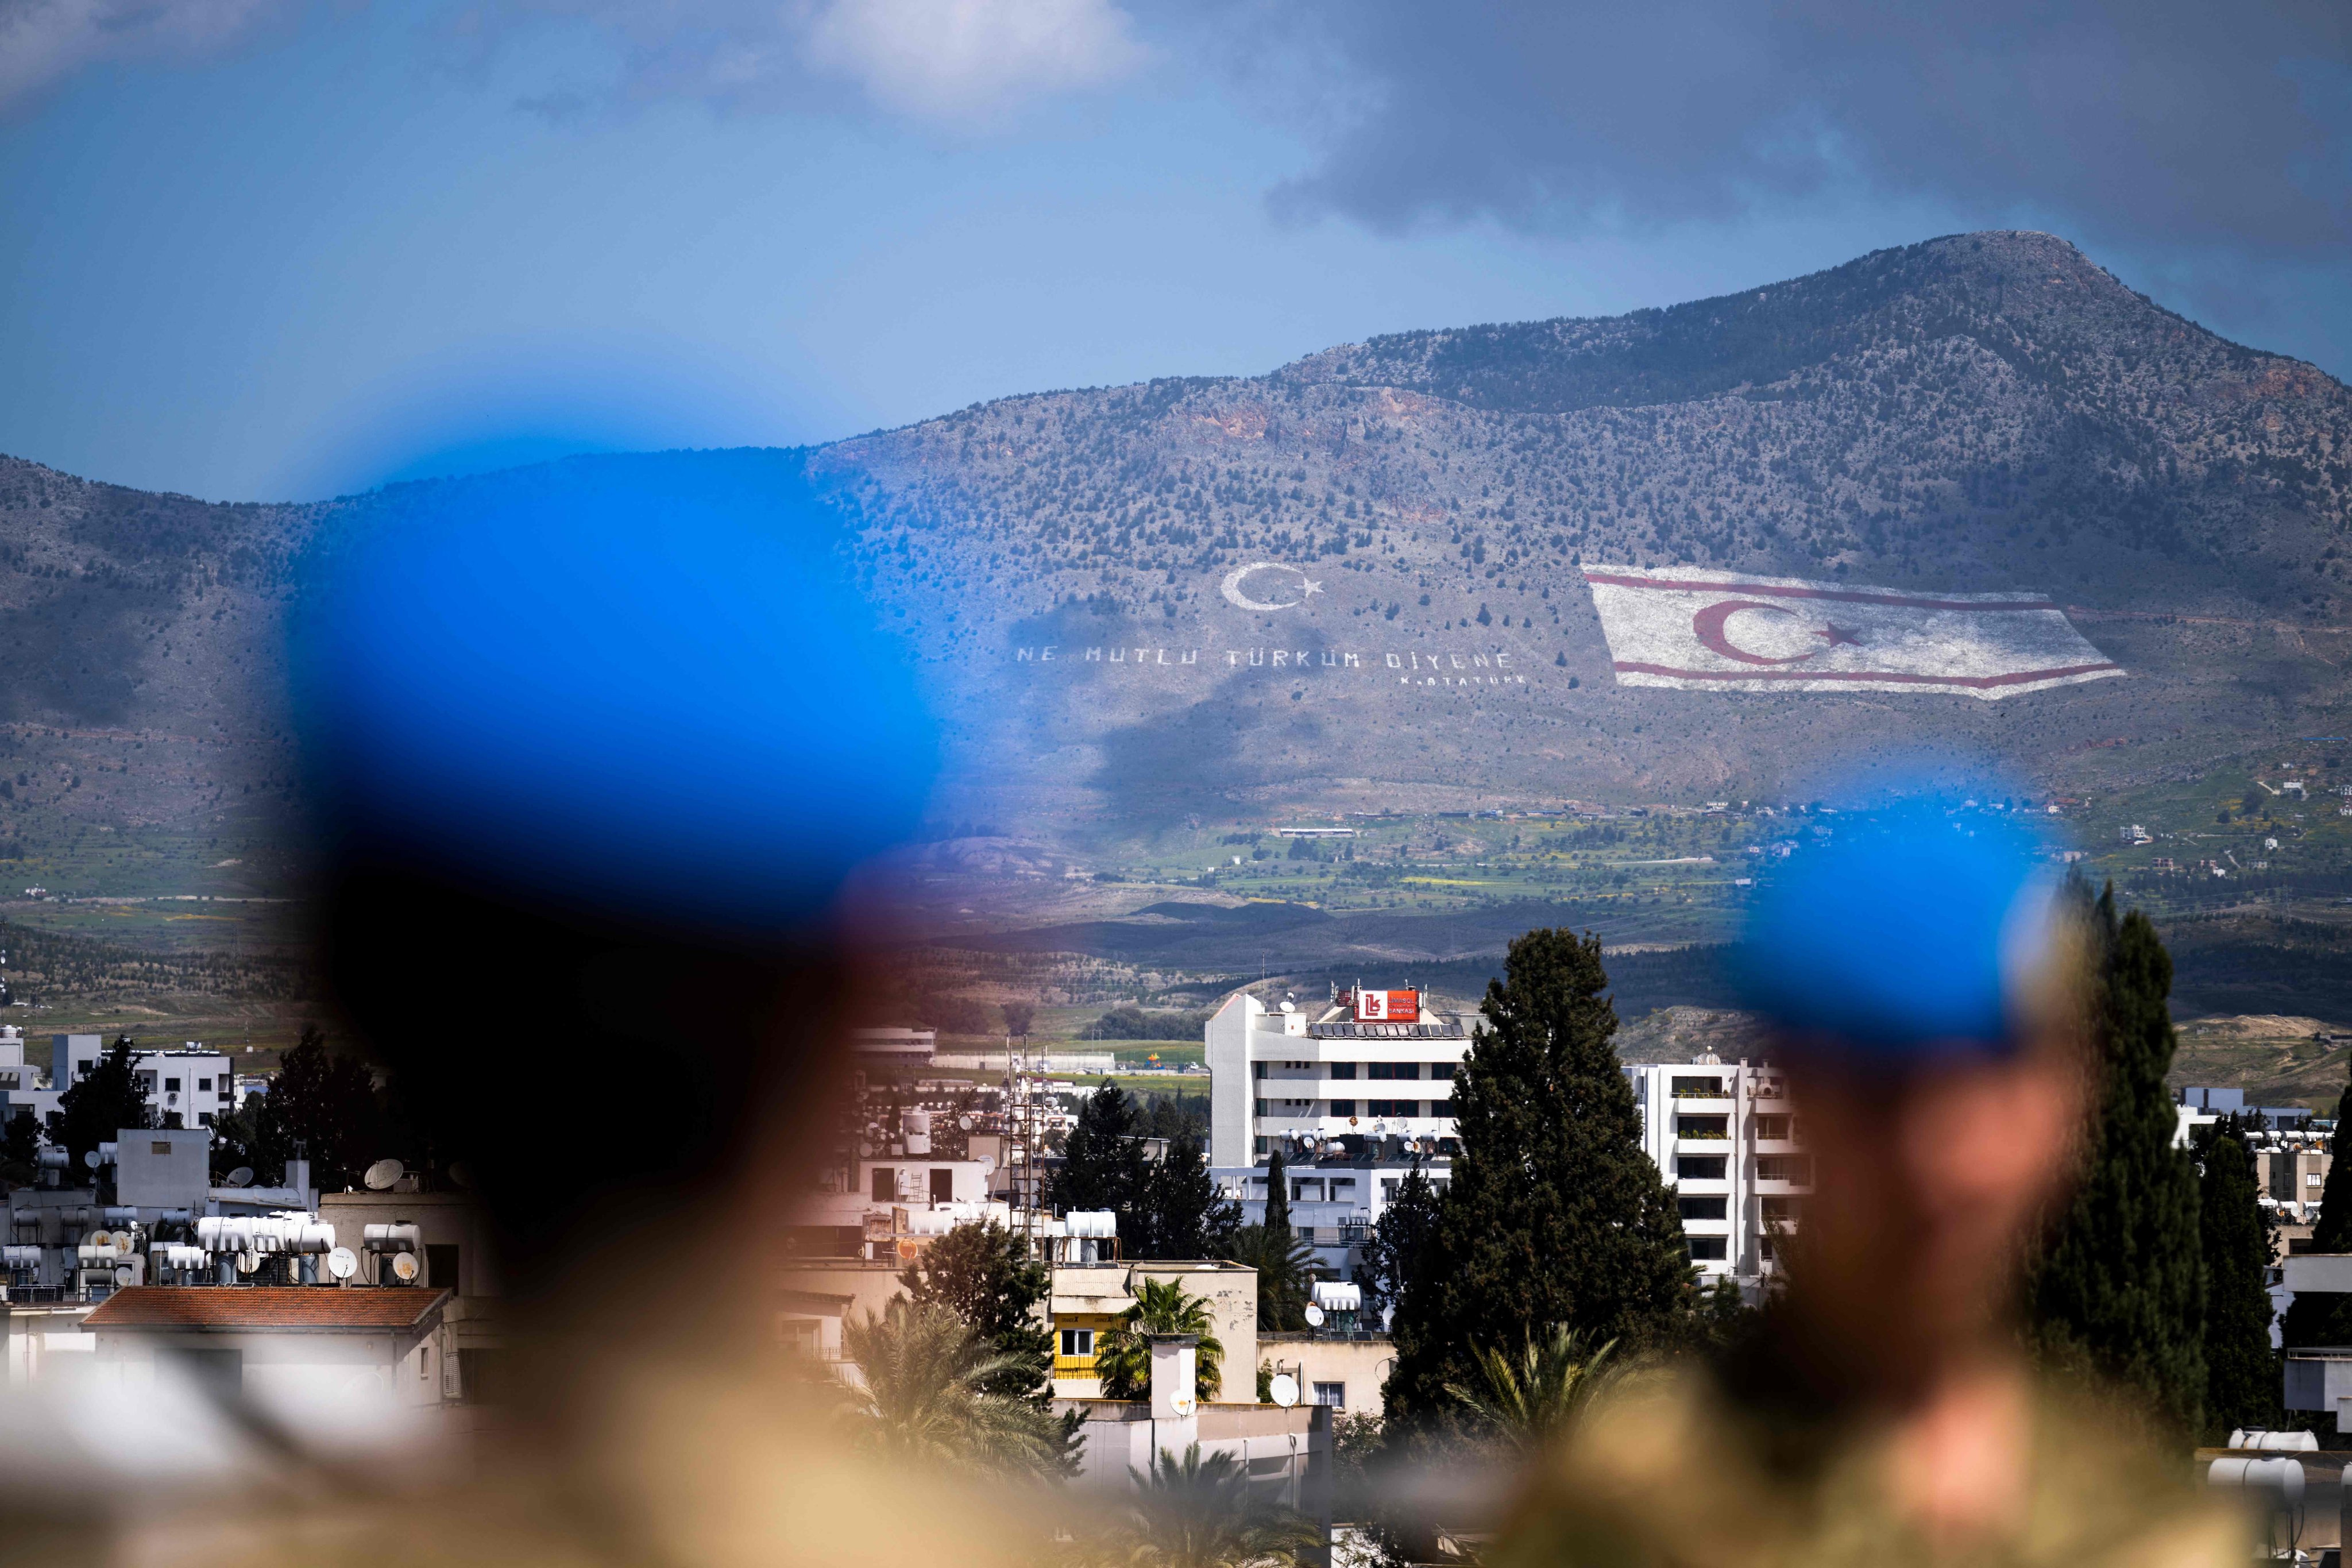 Members of the UN Peacekeeping Force in Cyprus on the roof of the Ledra Palace in the buffer zone separating the divided capital of Nicosia. Photo: AFP